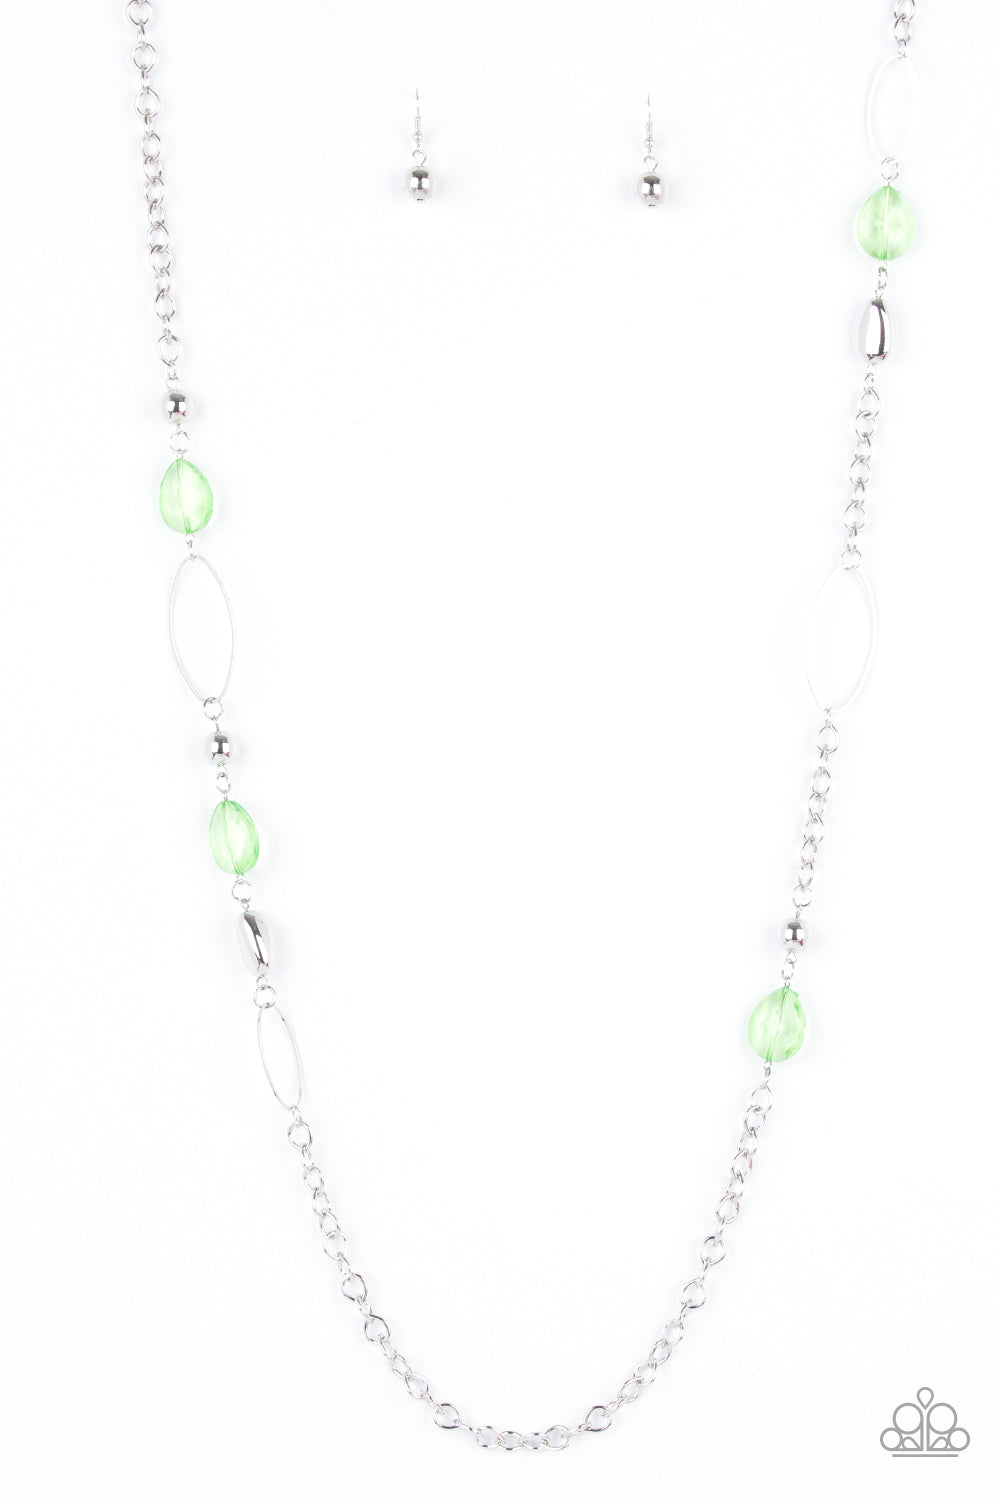 SHEER As Fate - Green and Silver Necklace - Paparazzi Accessories - Faceted Apple Green teardrop beads, dainty oval hoops, and silver accent beads descend along a silver chain in a whimsical pattern.